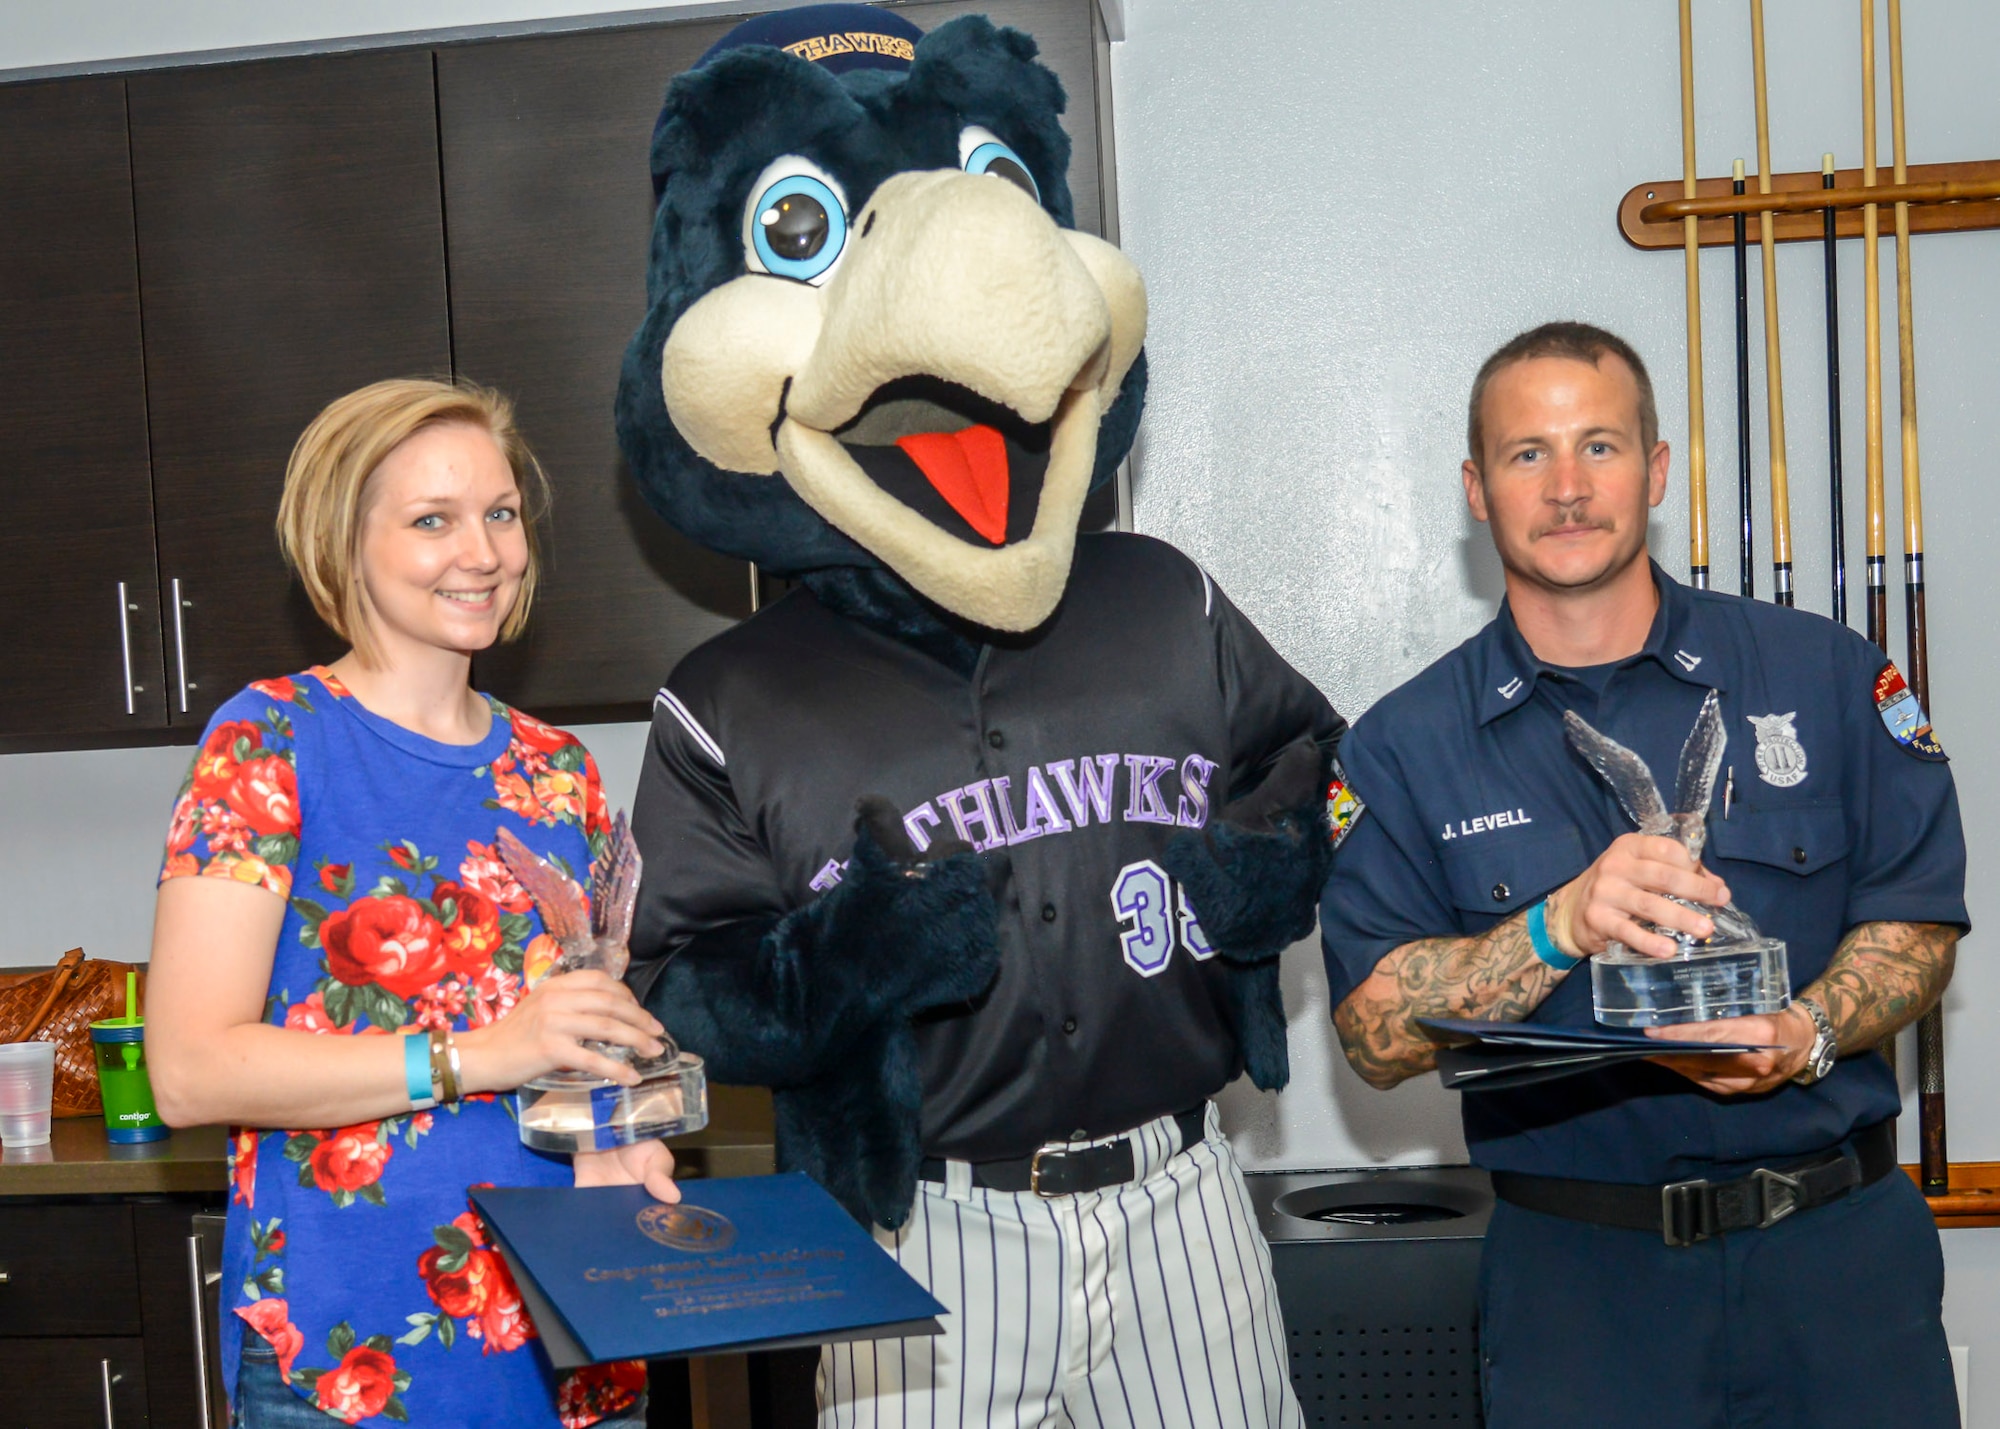 Tech. Sgt. Janna Ybarra, 412th Medical Group, and Lead Firefighter James Levell, 812th Civil Engineer Squadron, pose with JetHawks mascot, KaBoom, during a Lancaster JetHawks game at the Hangar baseball stadium in Lancaster, California, Aug. 24. The pair were honored by local civic leaders for their service to the Air Force and the local community. (U.S. Air Force photo by Giancarlo Casem)